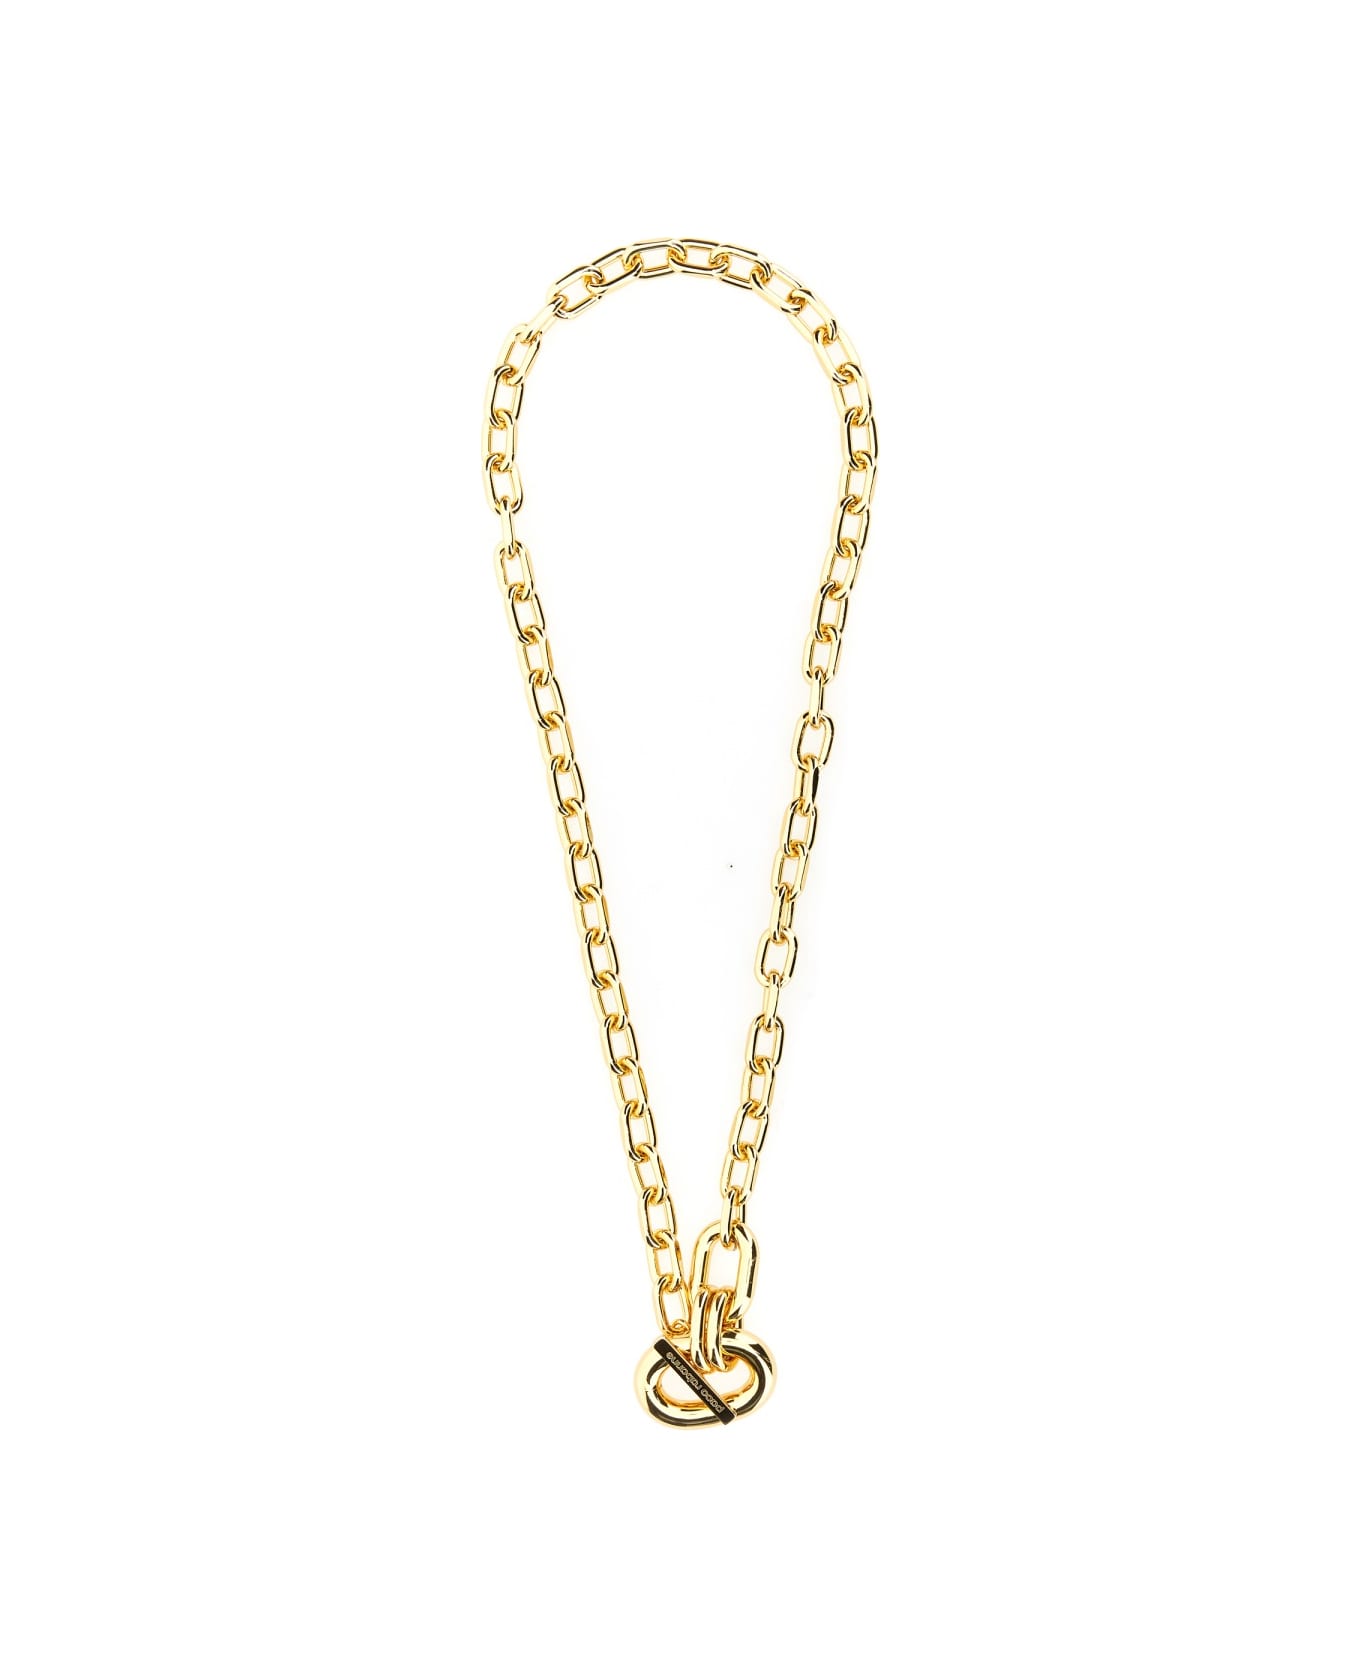 Paco Rabanne Chain Necklace - GOLD